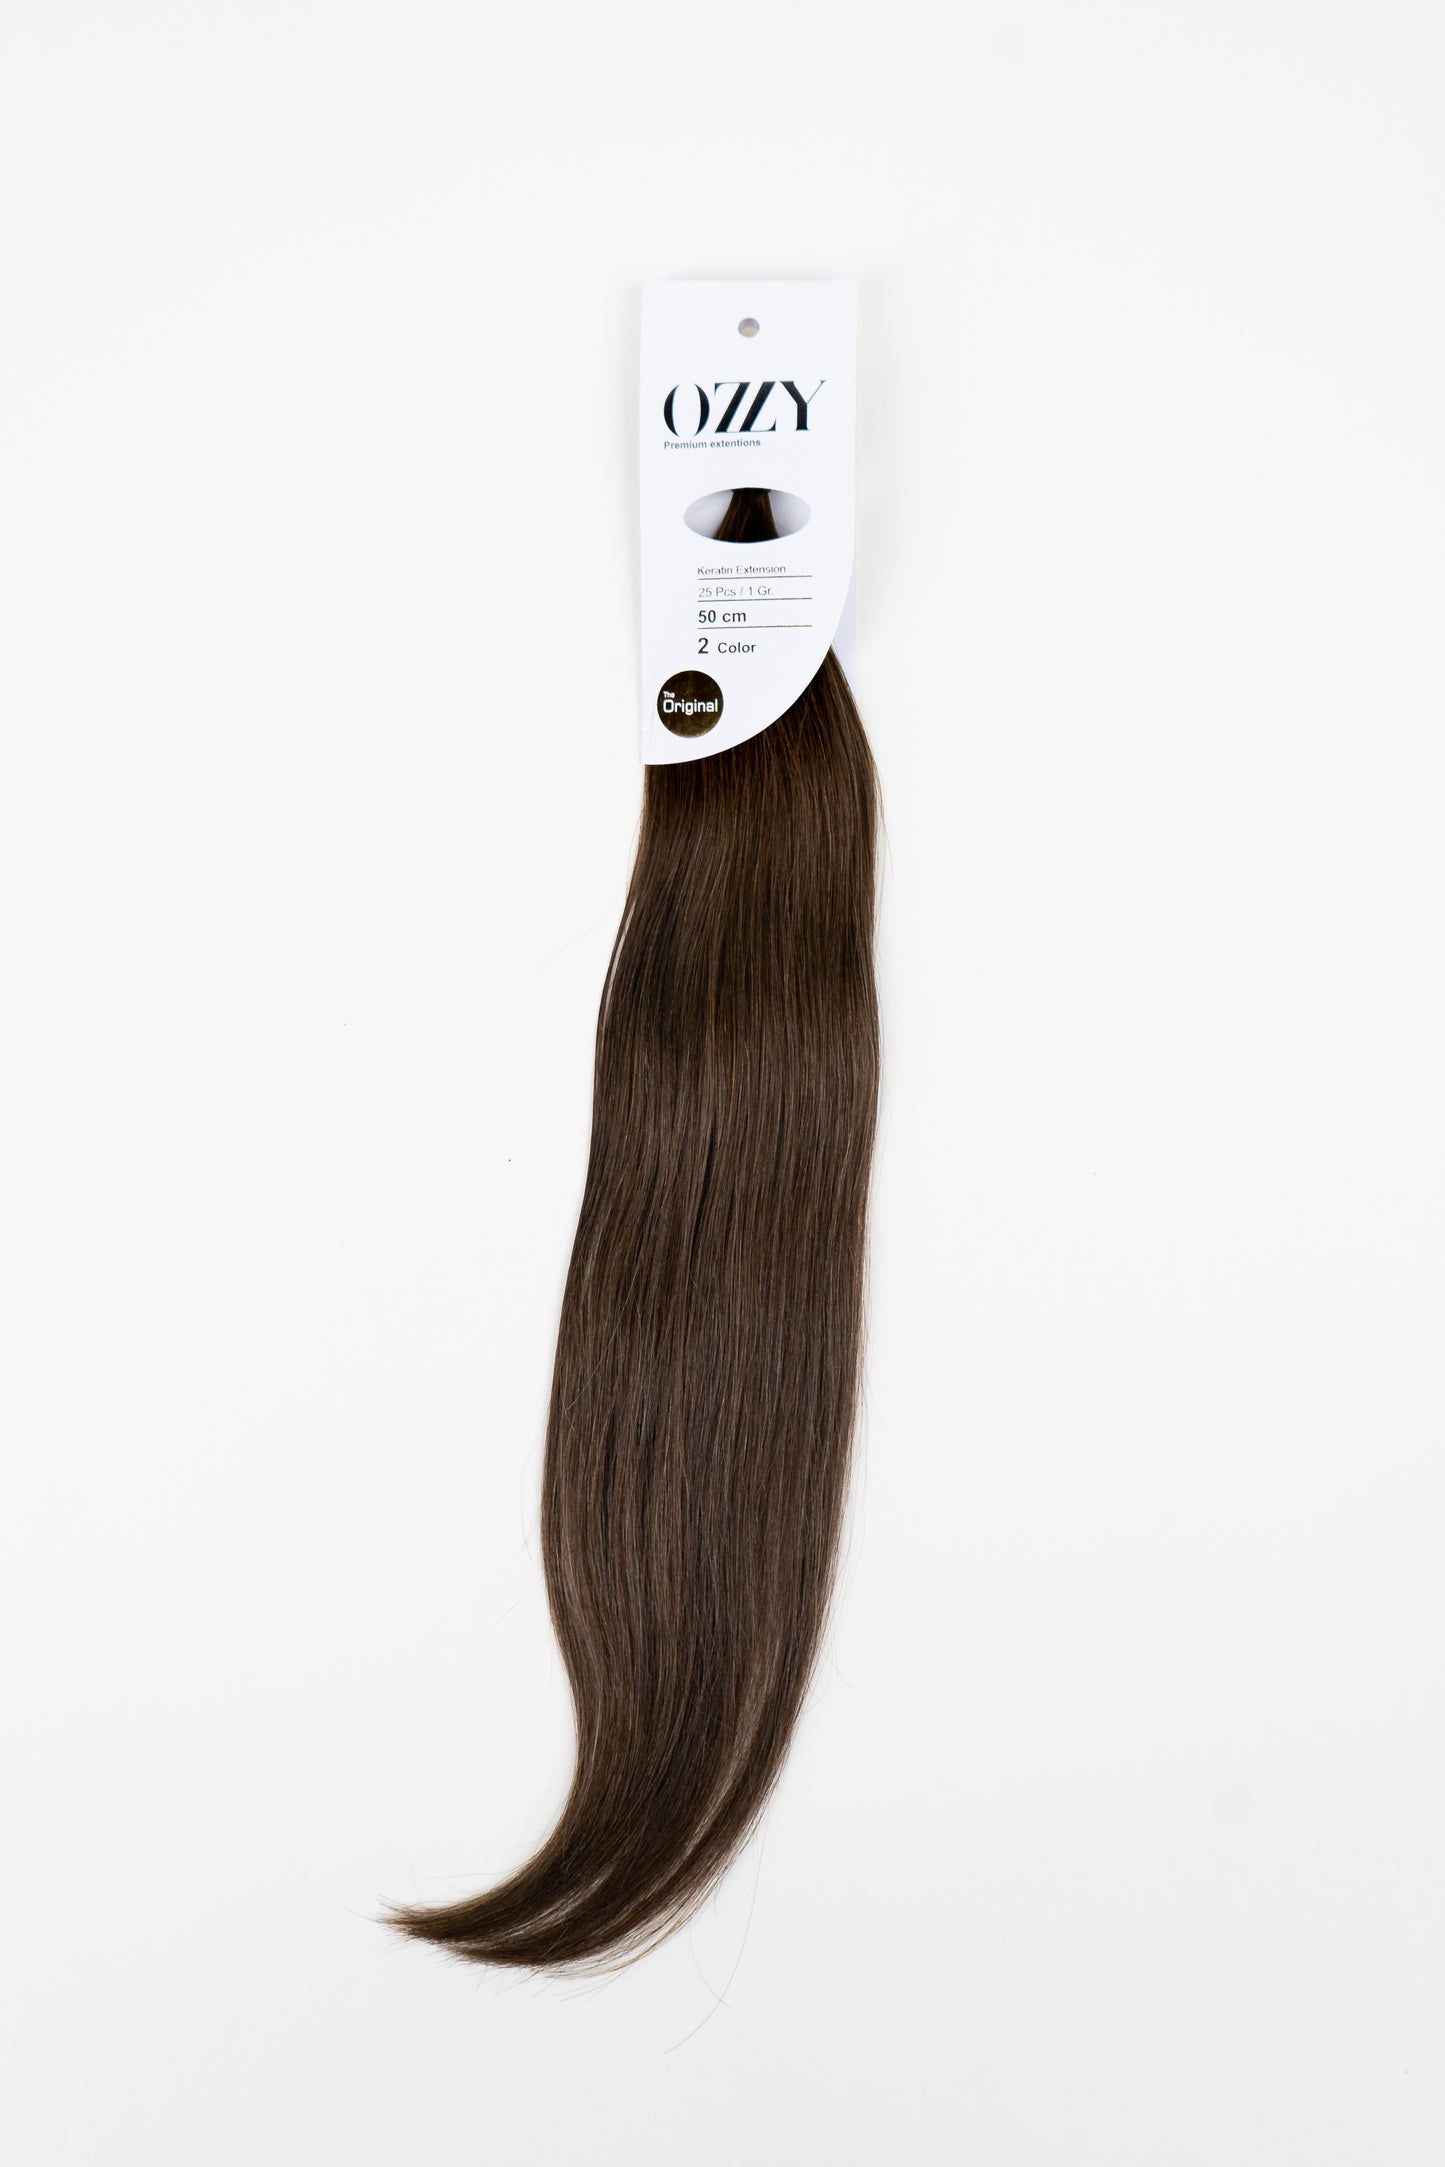 Keratin Extension #2 by Ozzy